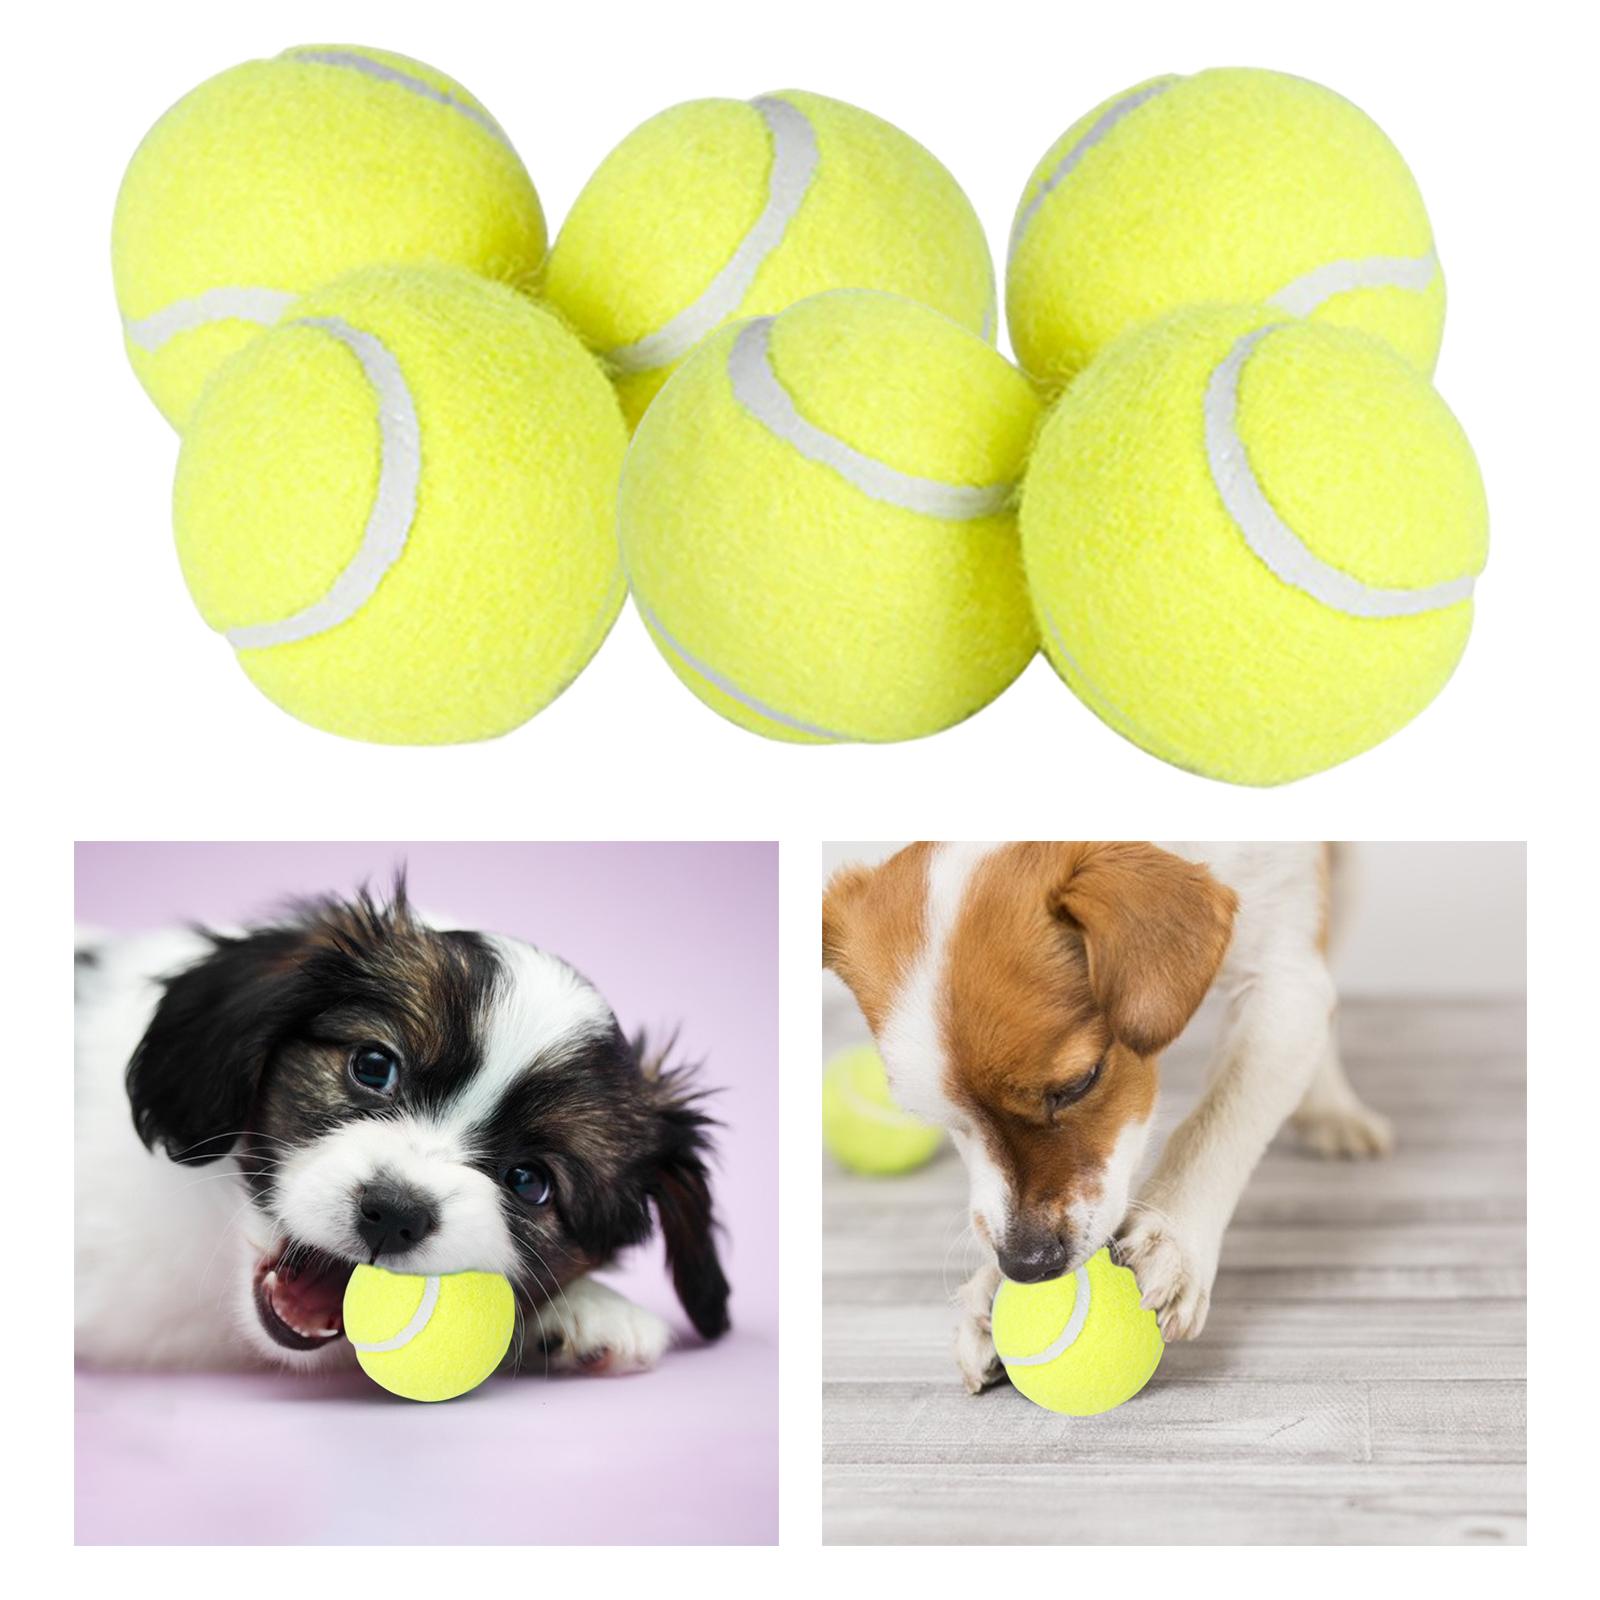 IkHigh-Bounce-Practice-Training-for-Dogs-Outdoor-Elasticity-Durable-Tennis-for-Bite-Chase-and-Chomp-5cm.jpg_